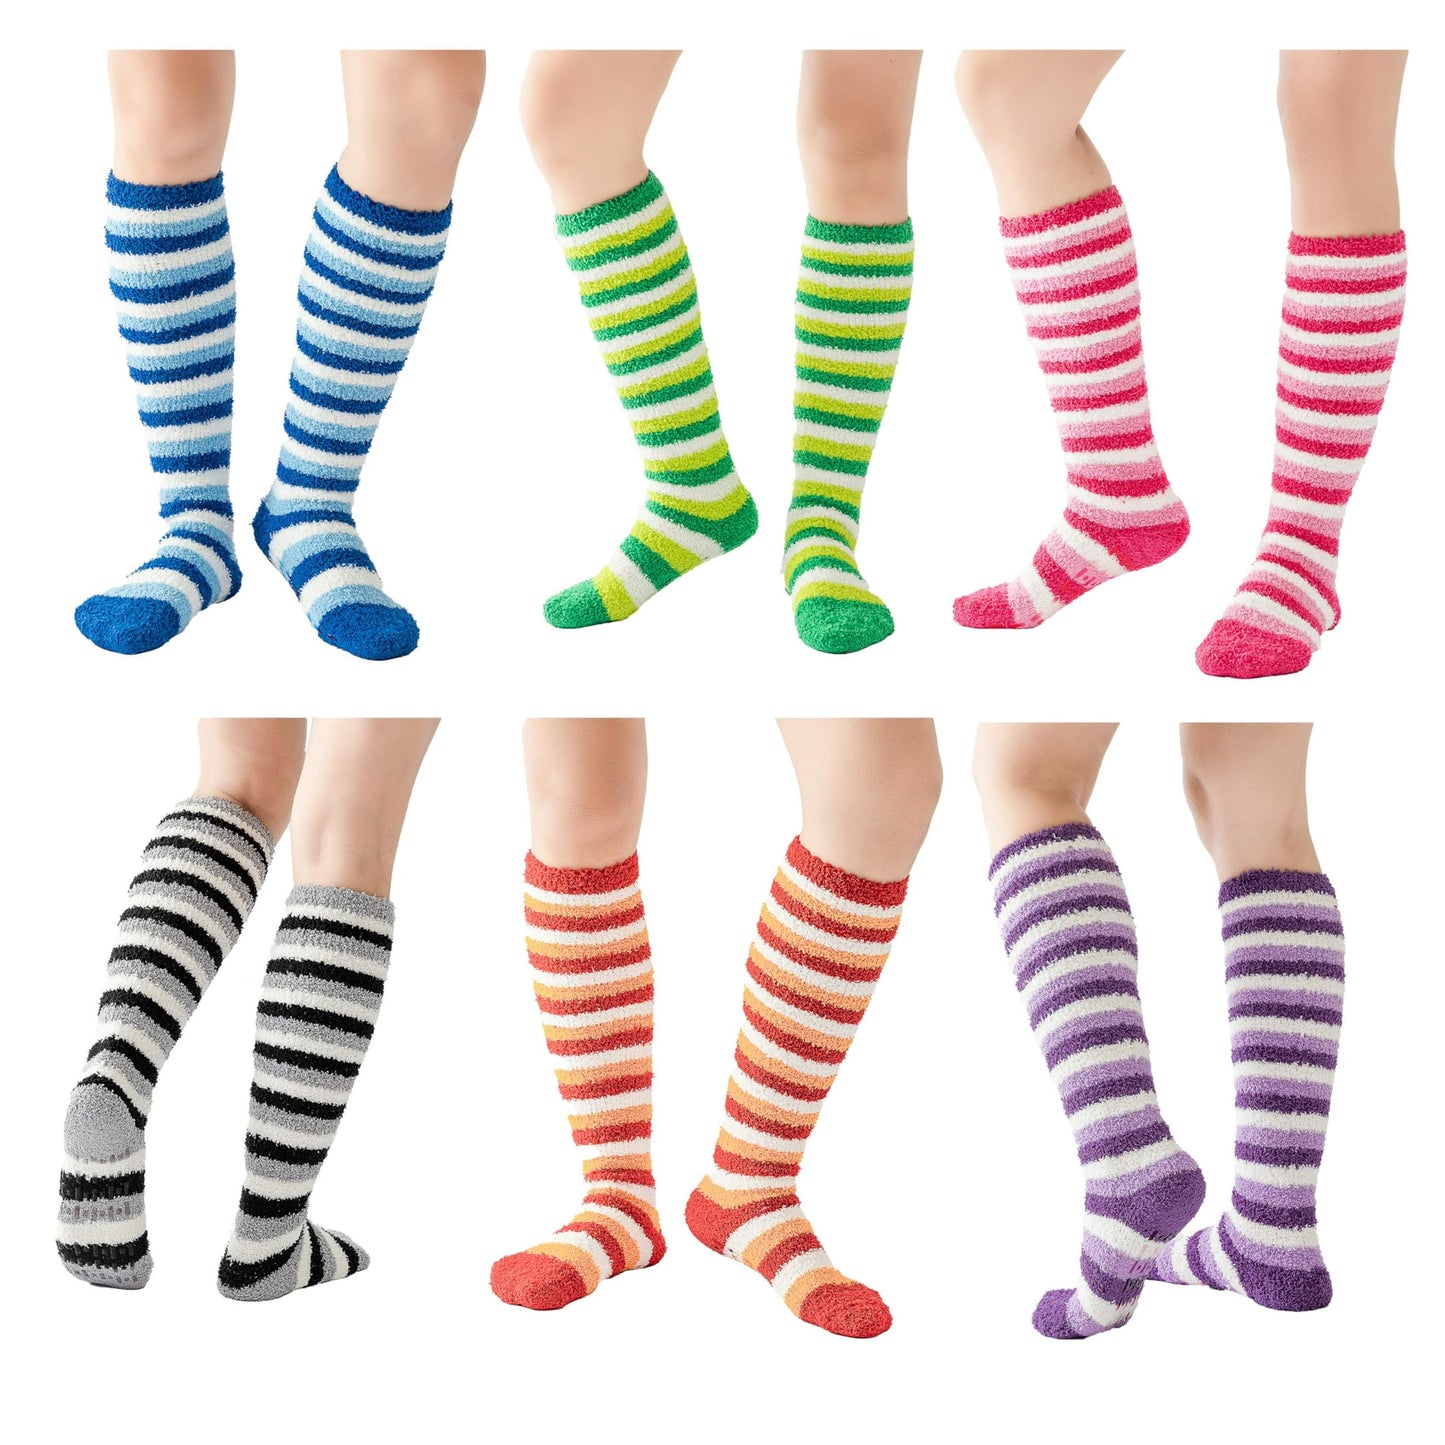 Womens Thick Comfortable Soft Fuzzy Socks Cozy Calf High Winter Plush Socks 6 Pairs Stripe With Anti Slip Soles Style Size 9-11